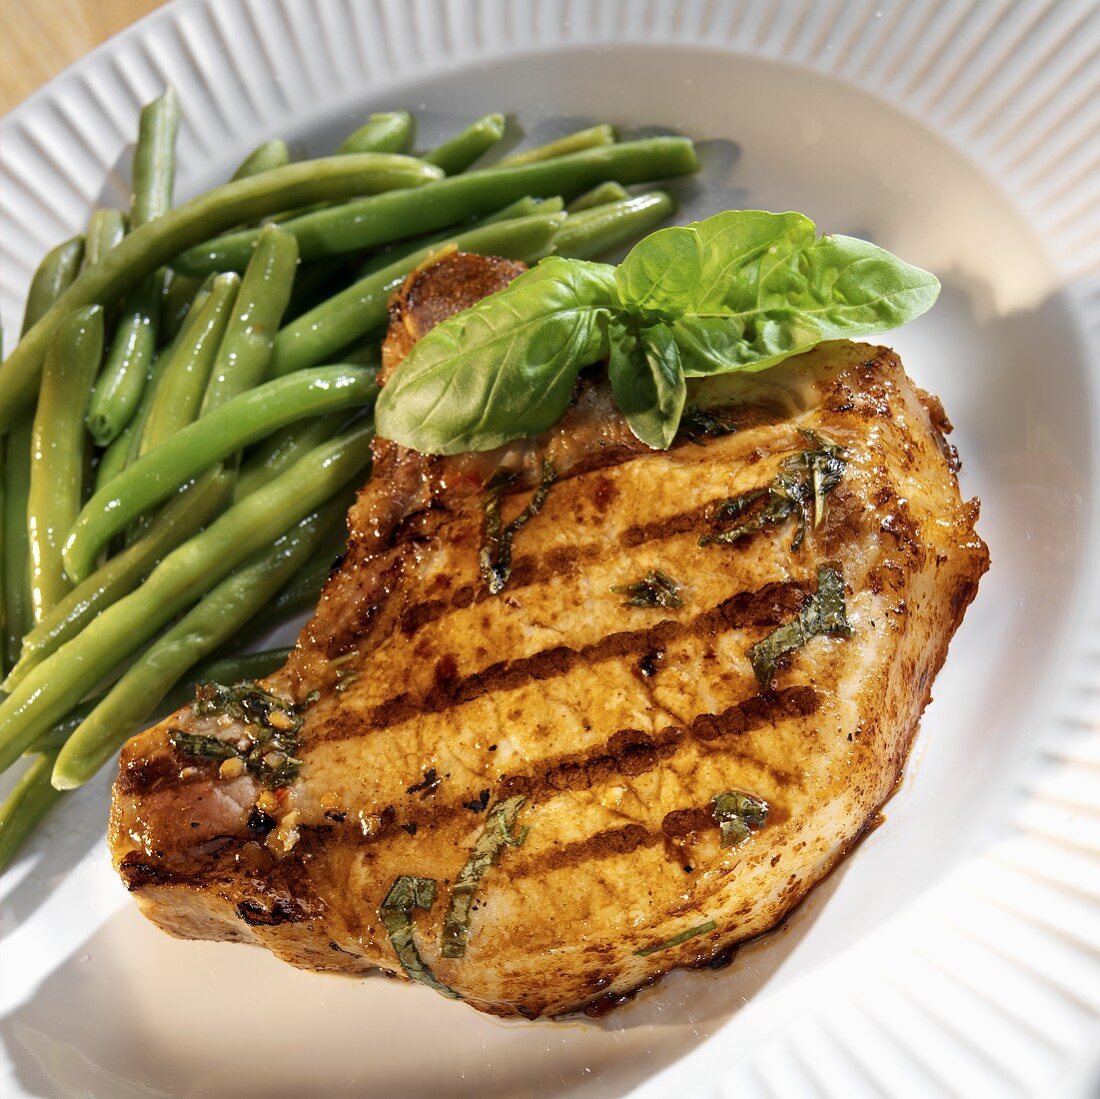 Barbecued pork chop with basil and green beans